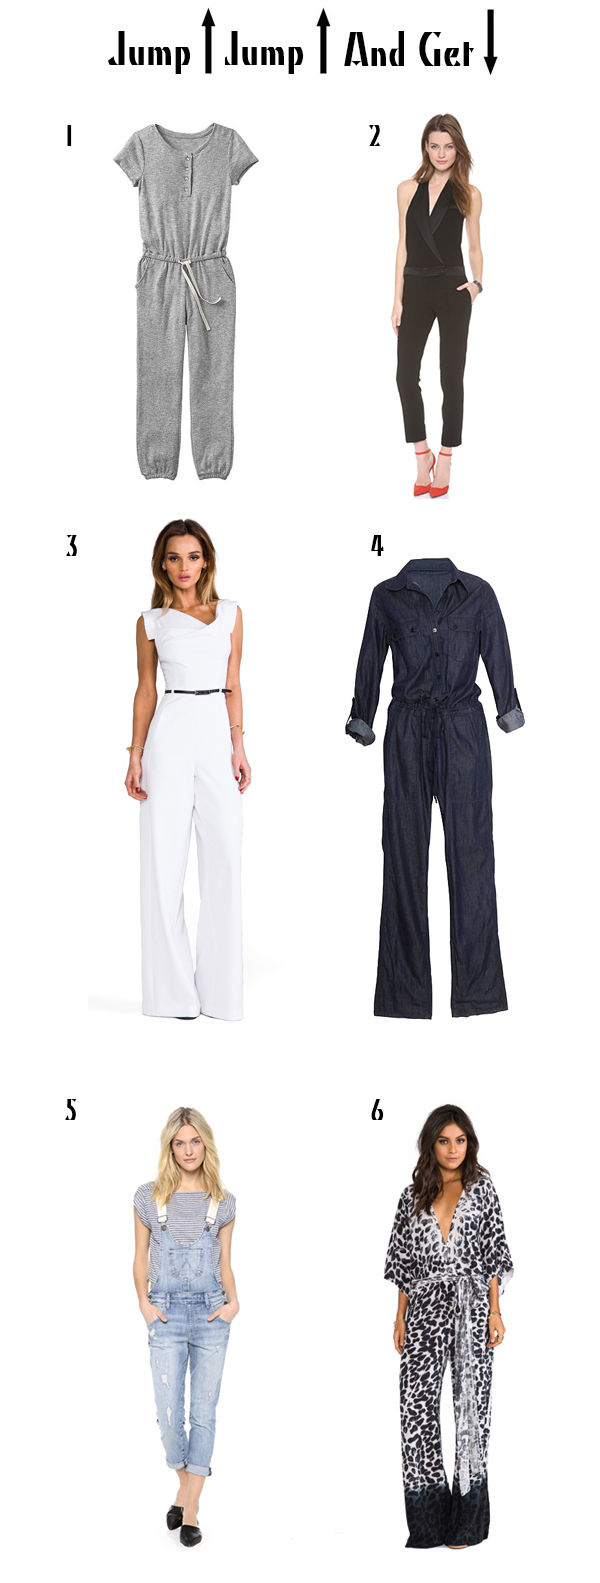 Jump Around... The Jumpsuit Is Here To Stay (Yay!)